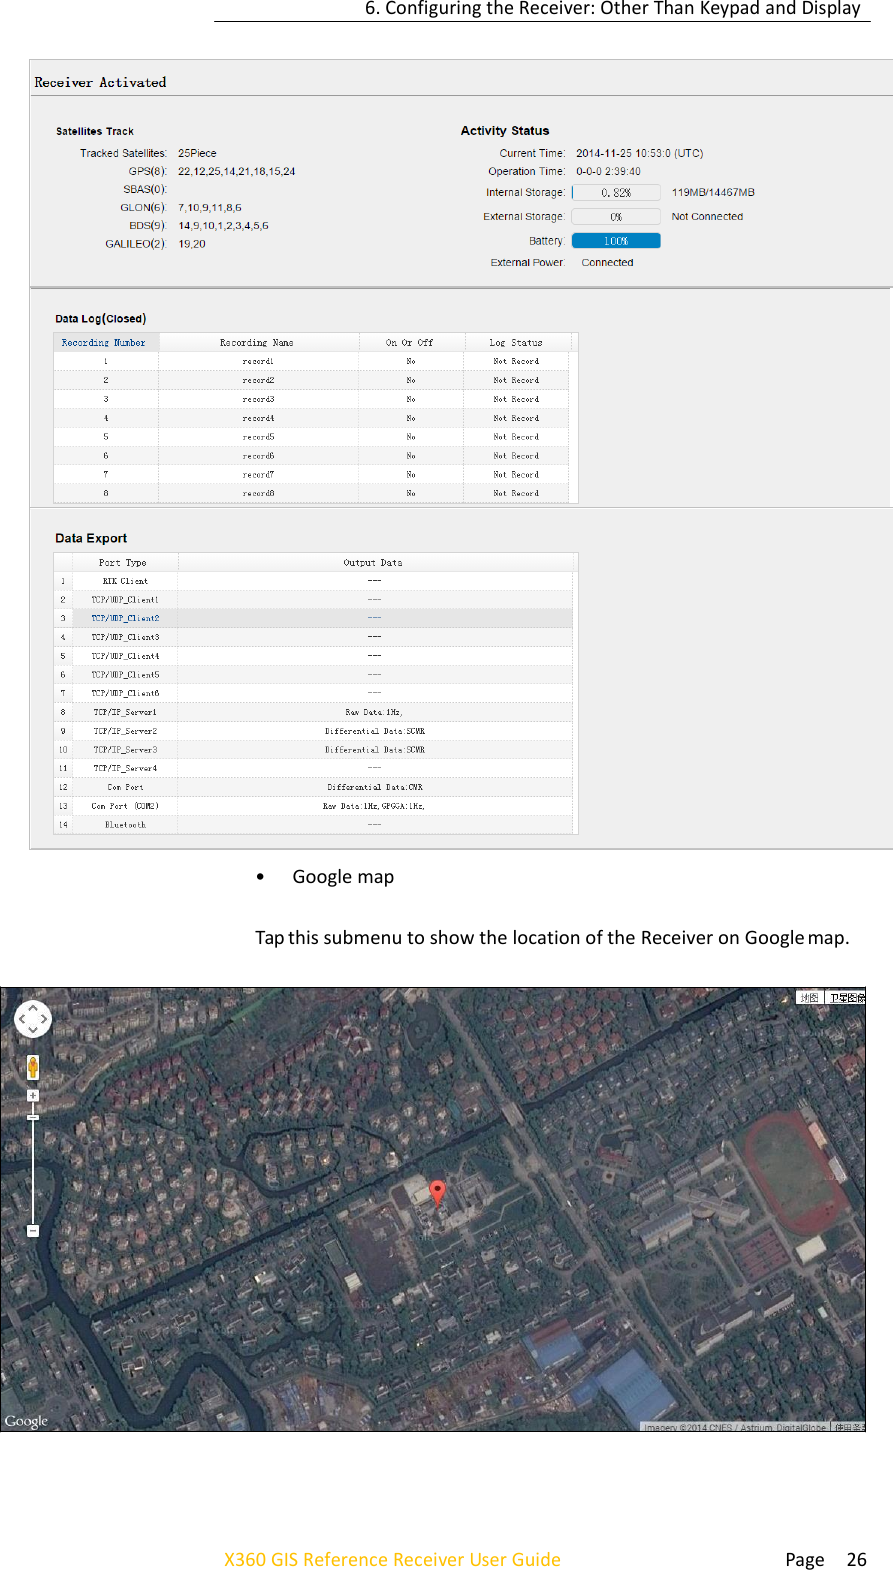 6. Configuring the Receiver: Other Than Keypad and Display  Page 26 X360 GIS Reference Receiver User Guide              • Google map  Tap this submenu to show the location of the Receiver on Google map.     